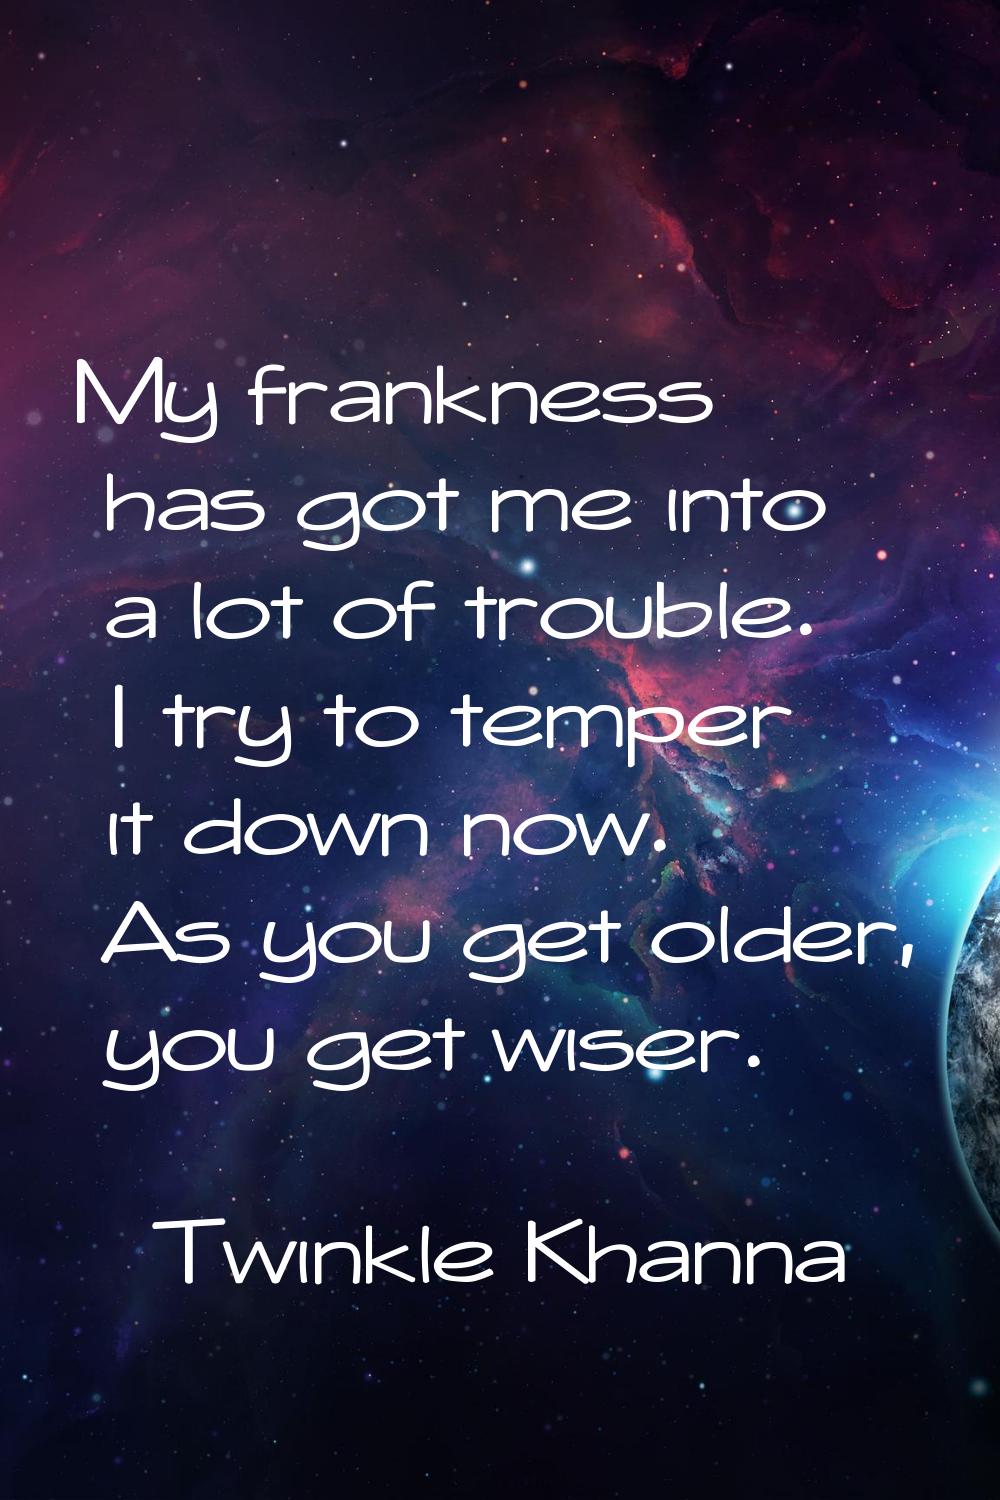 My frankness has got me into a lot of trouble. I try to temper it down now. As you get older, you g